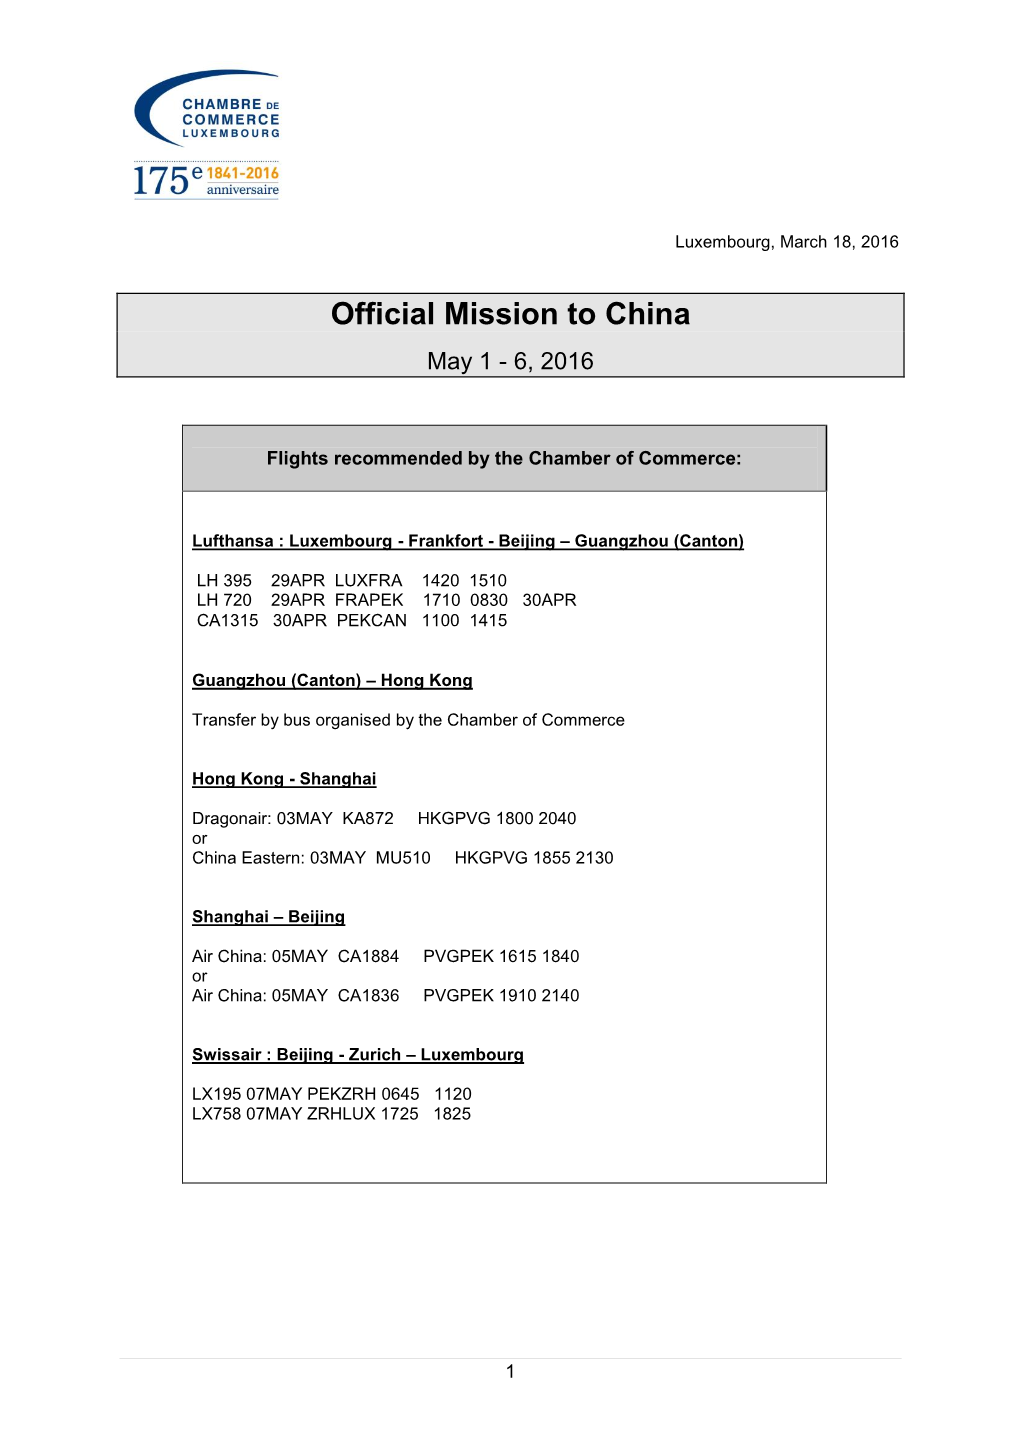 Official Mission to China